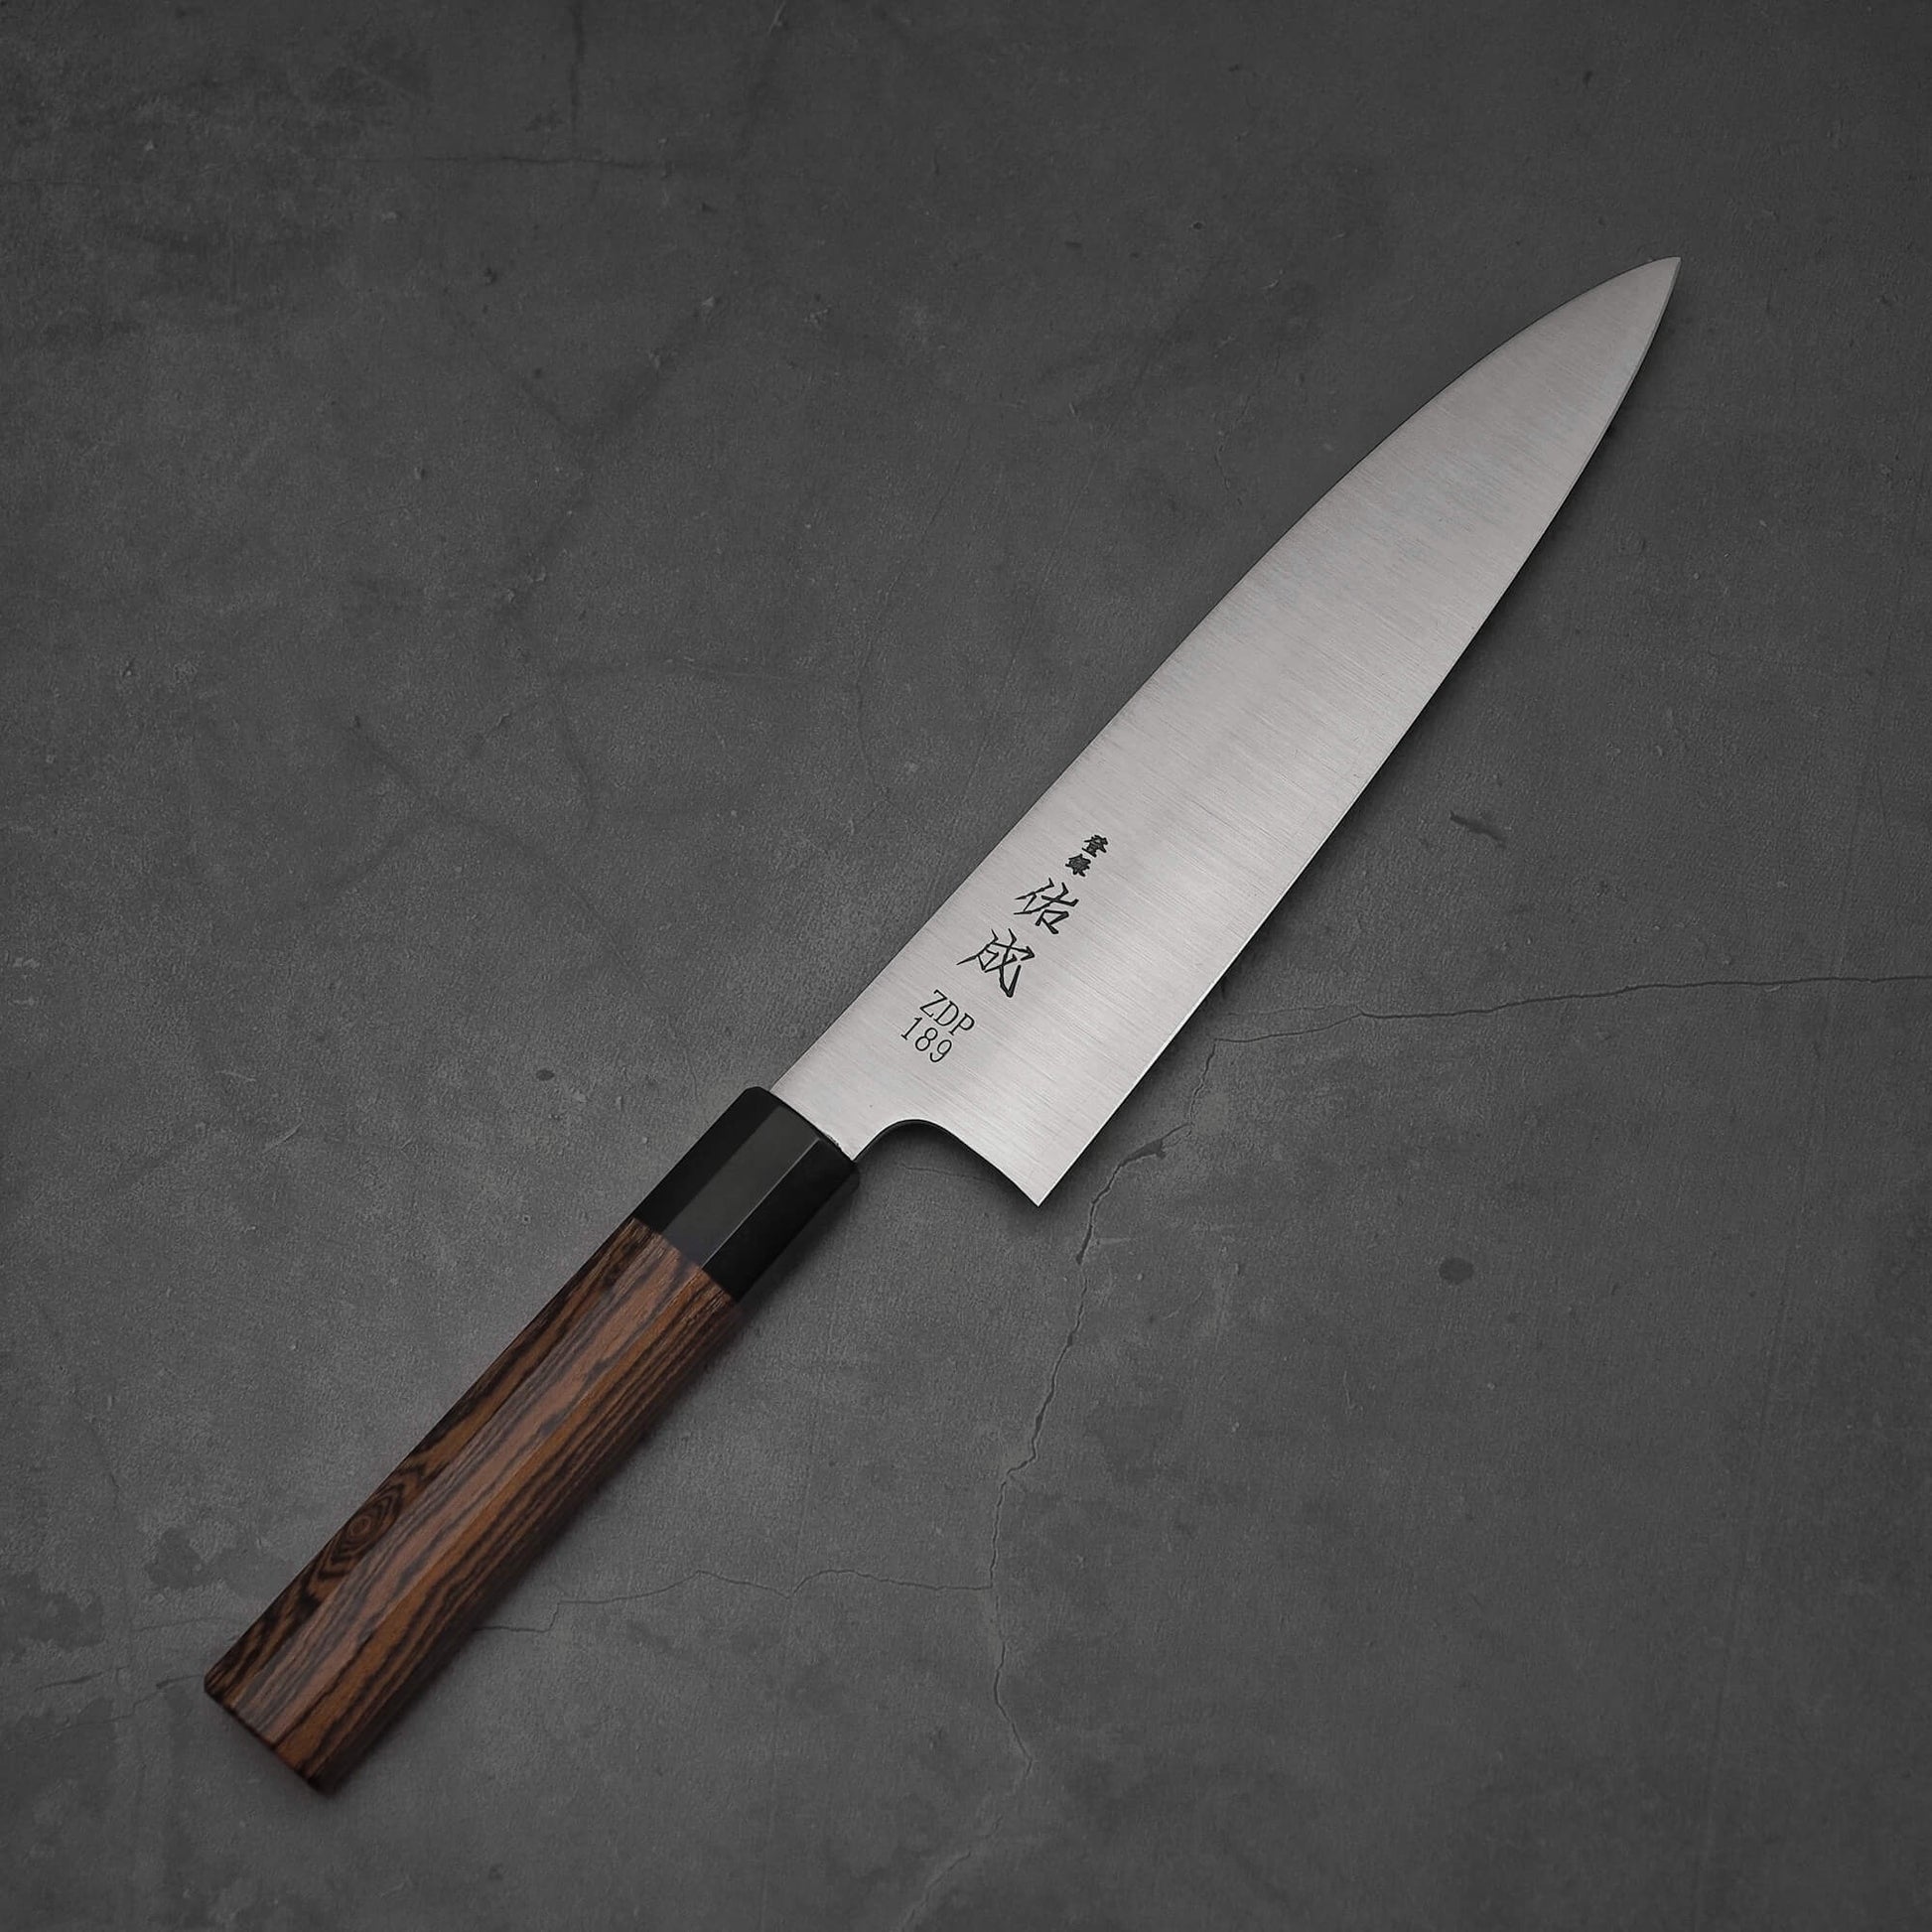 Top view of 210mm Sukenari ZDP189 gyuto where pointed tip is facing towards the upper right.